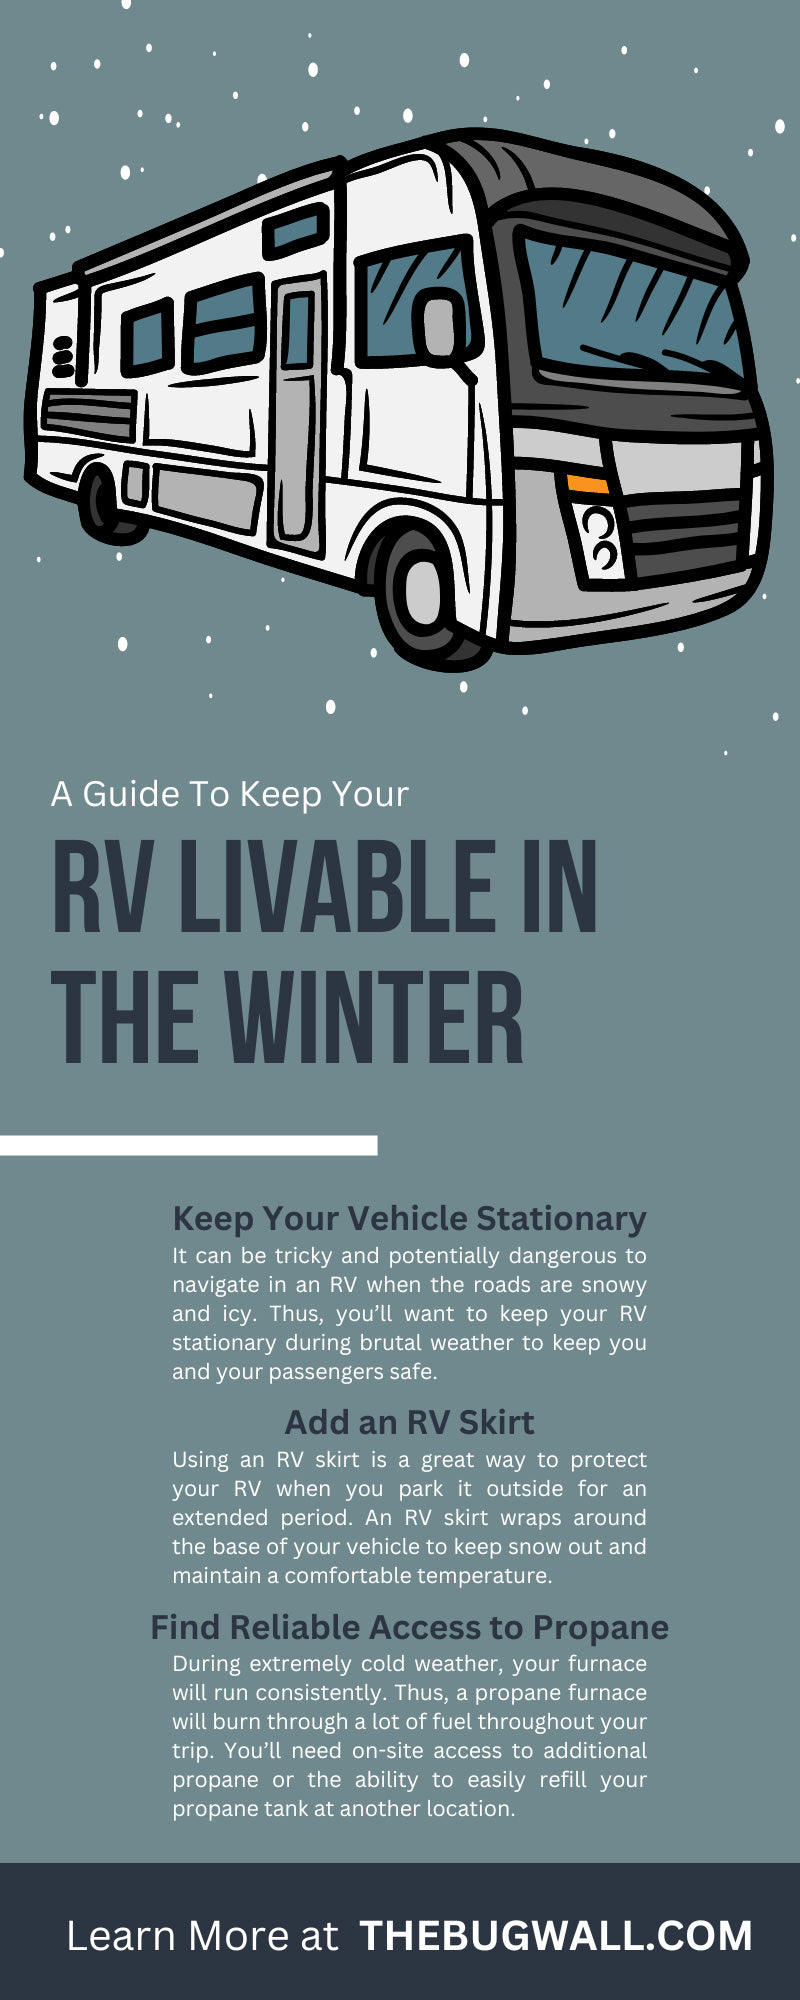 A Guide To Keep Your RV Livable in the Winter